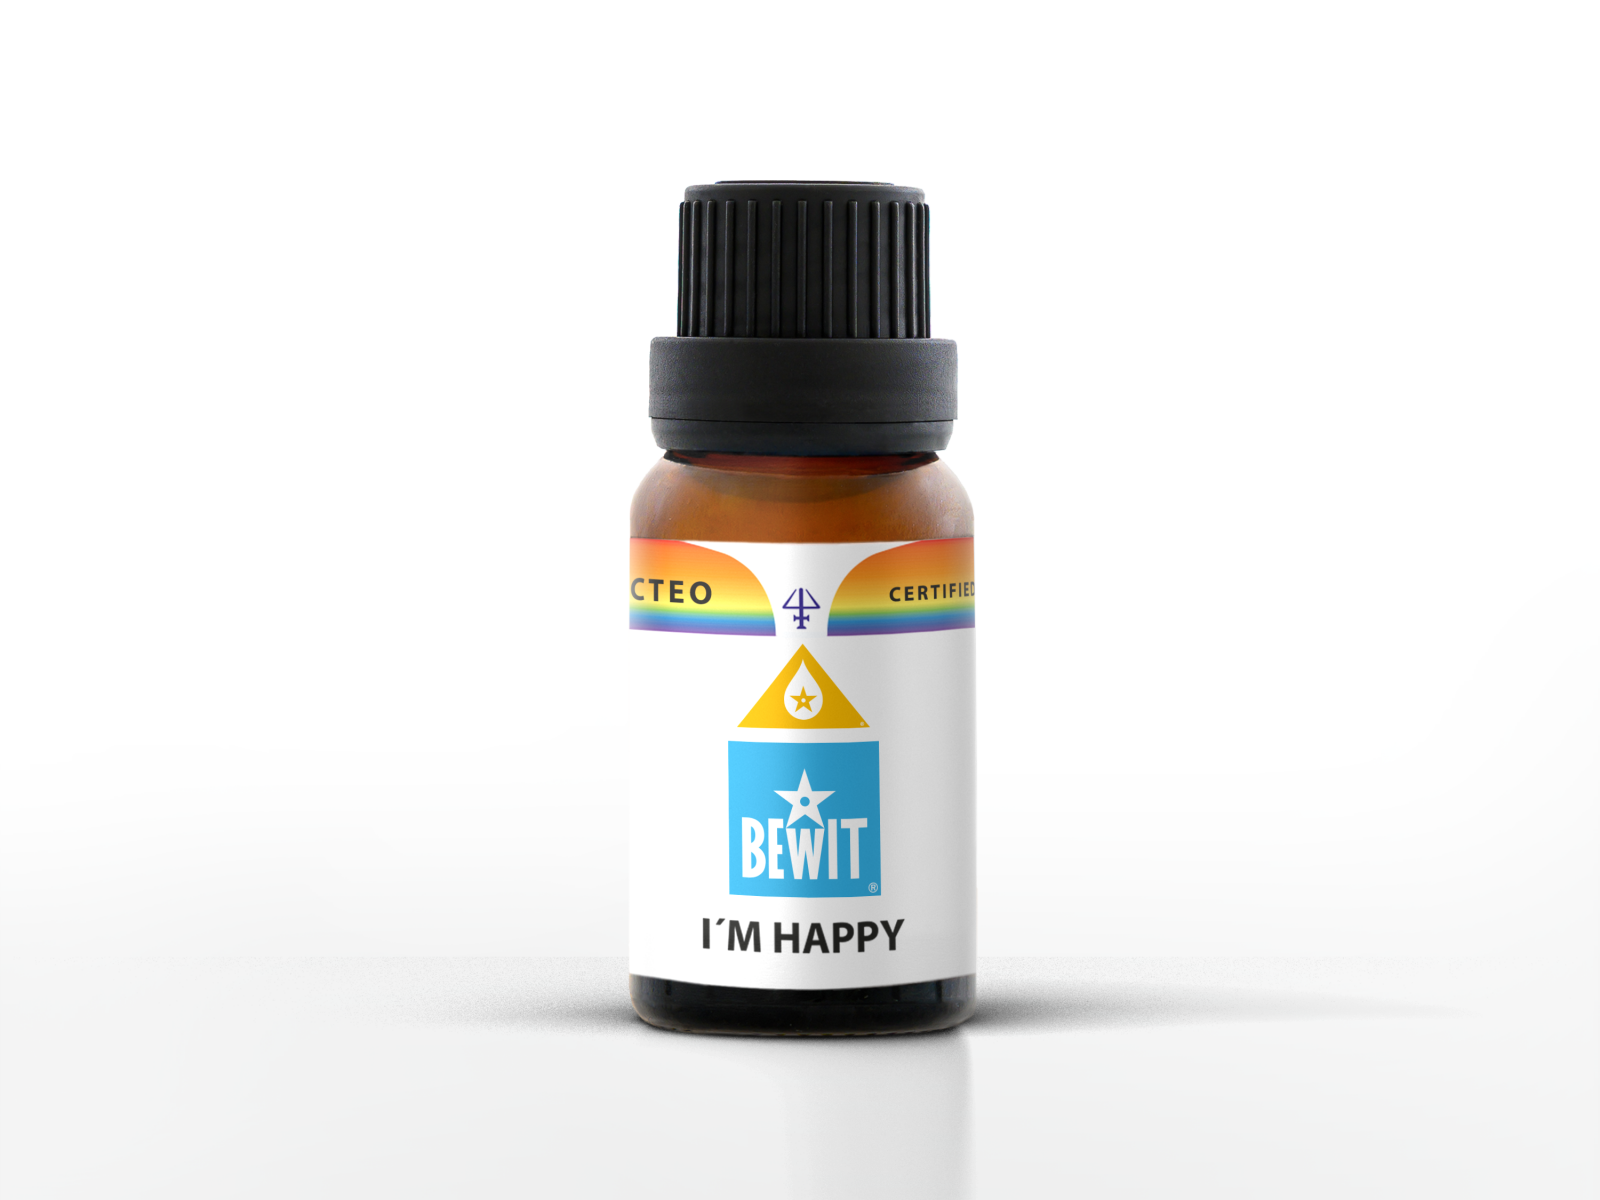 BEWIT I'M HAPPY - 100% natural essential oil blend in CTEO® quality